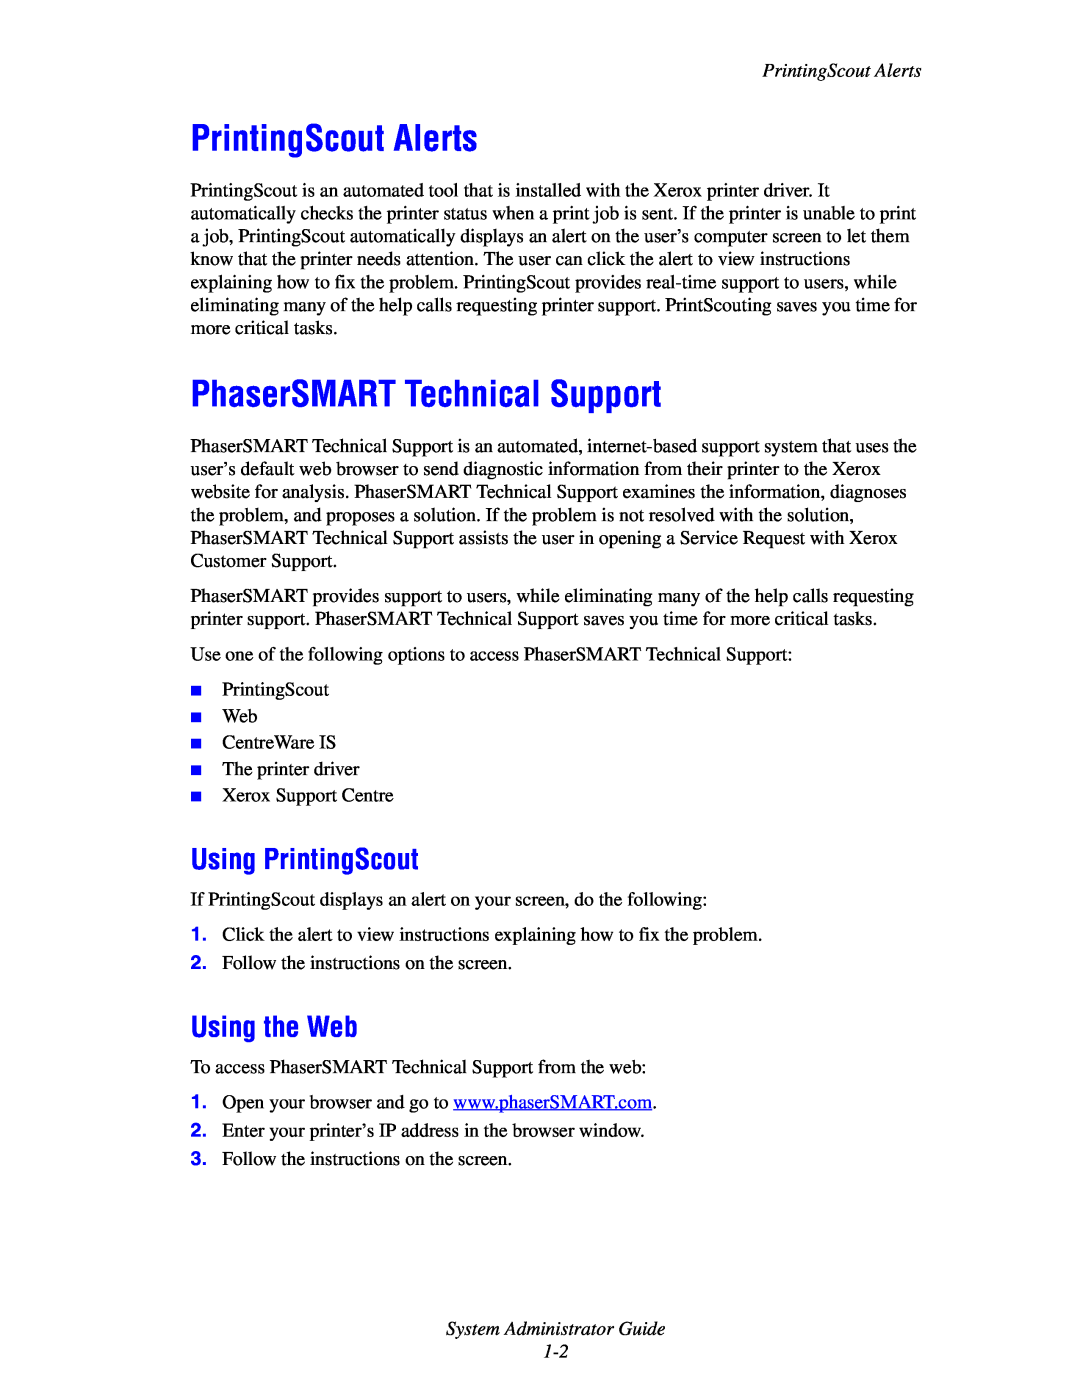 Xerox 6300, 6350, 8500, 8550 manual PrintingScout Alerts, PhaserSMART Technical Support, Using PrintingScout, Using the Web 